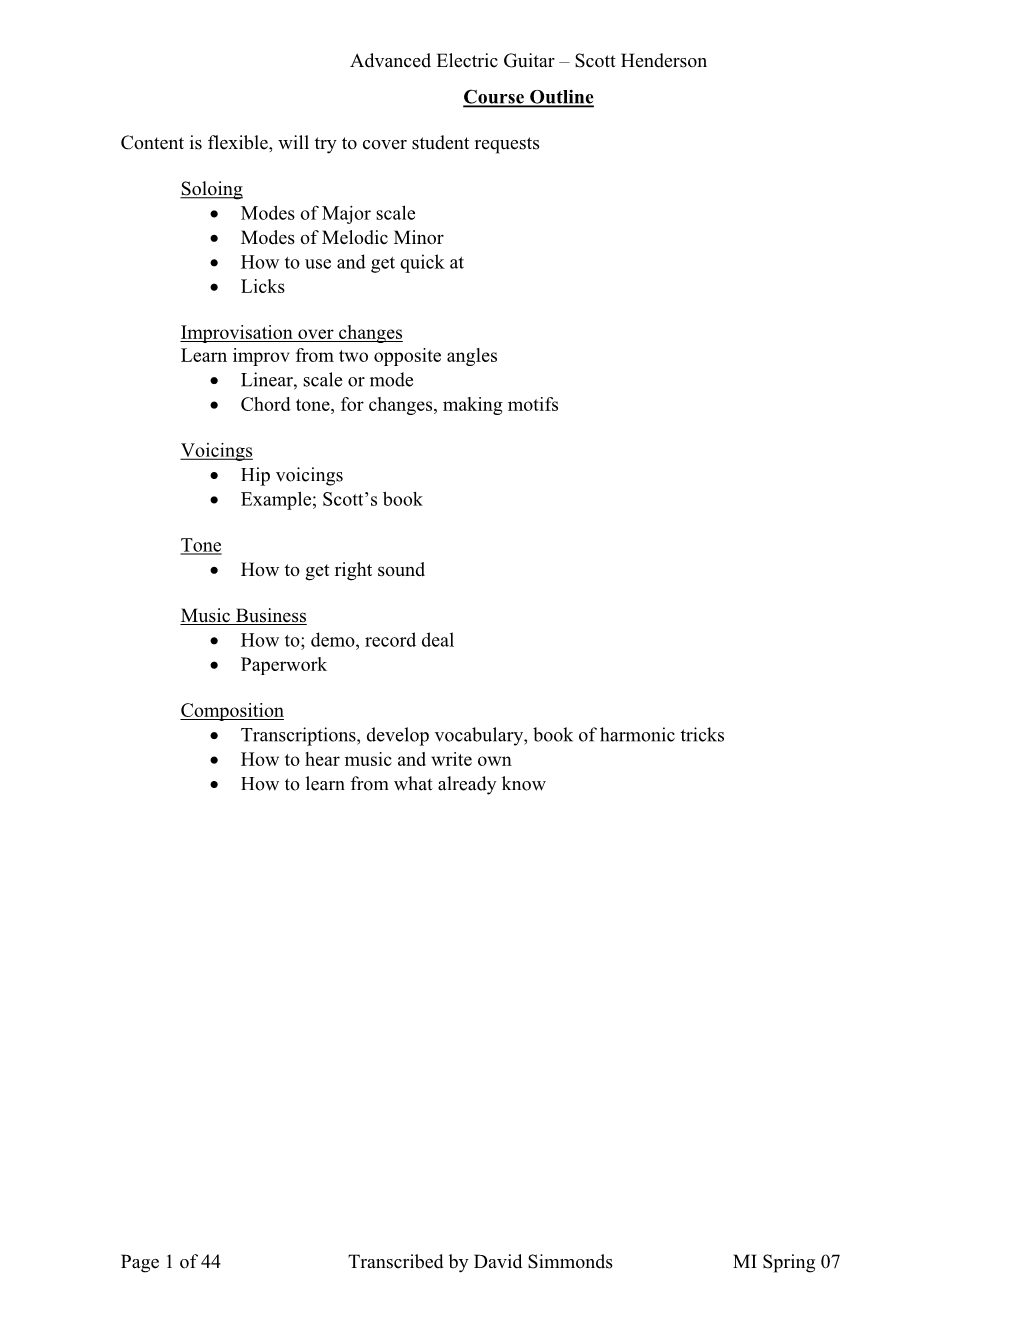 Scott Henderson Page 1 of 44 Transcribed by David Simmonds MI Spring 07 Course Outline Content Is F